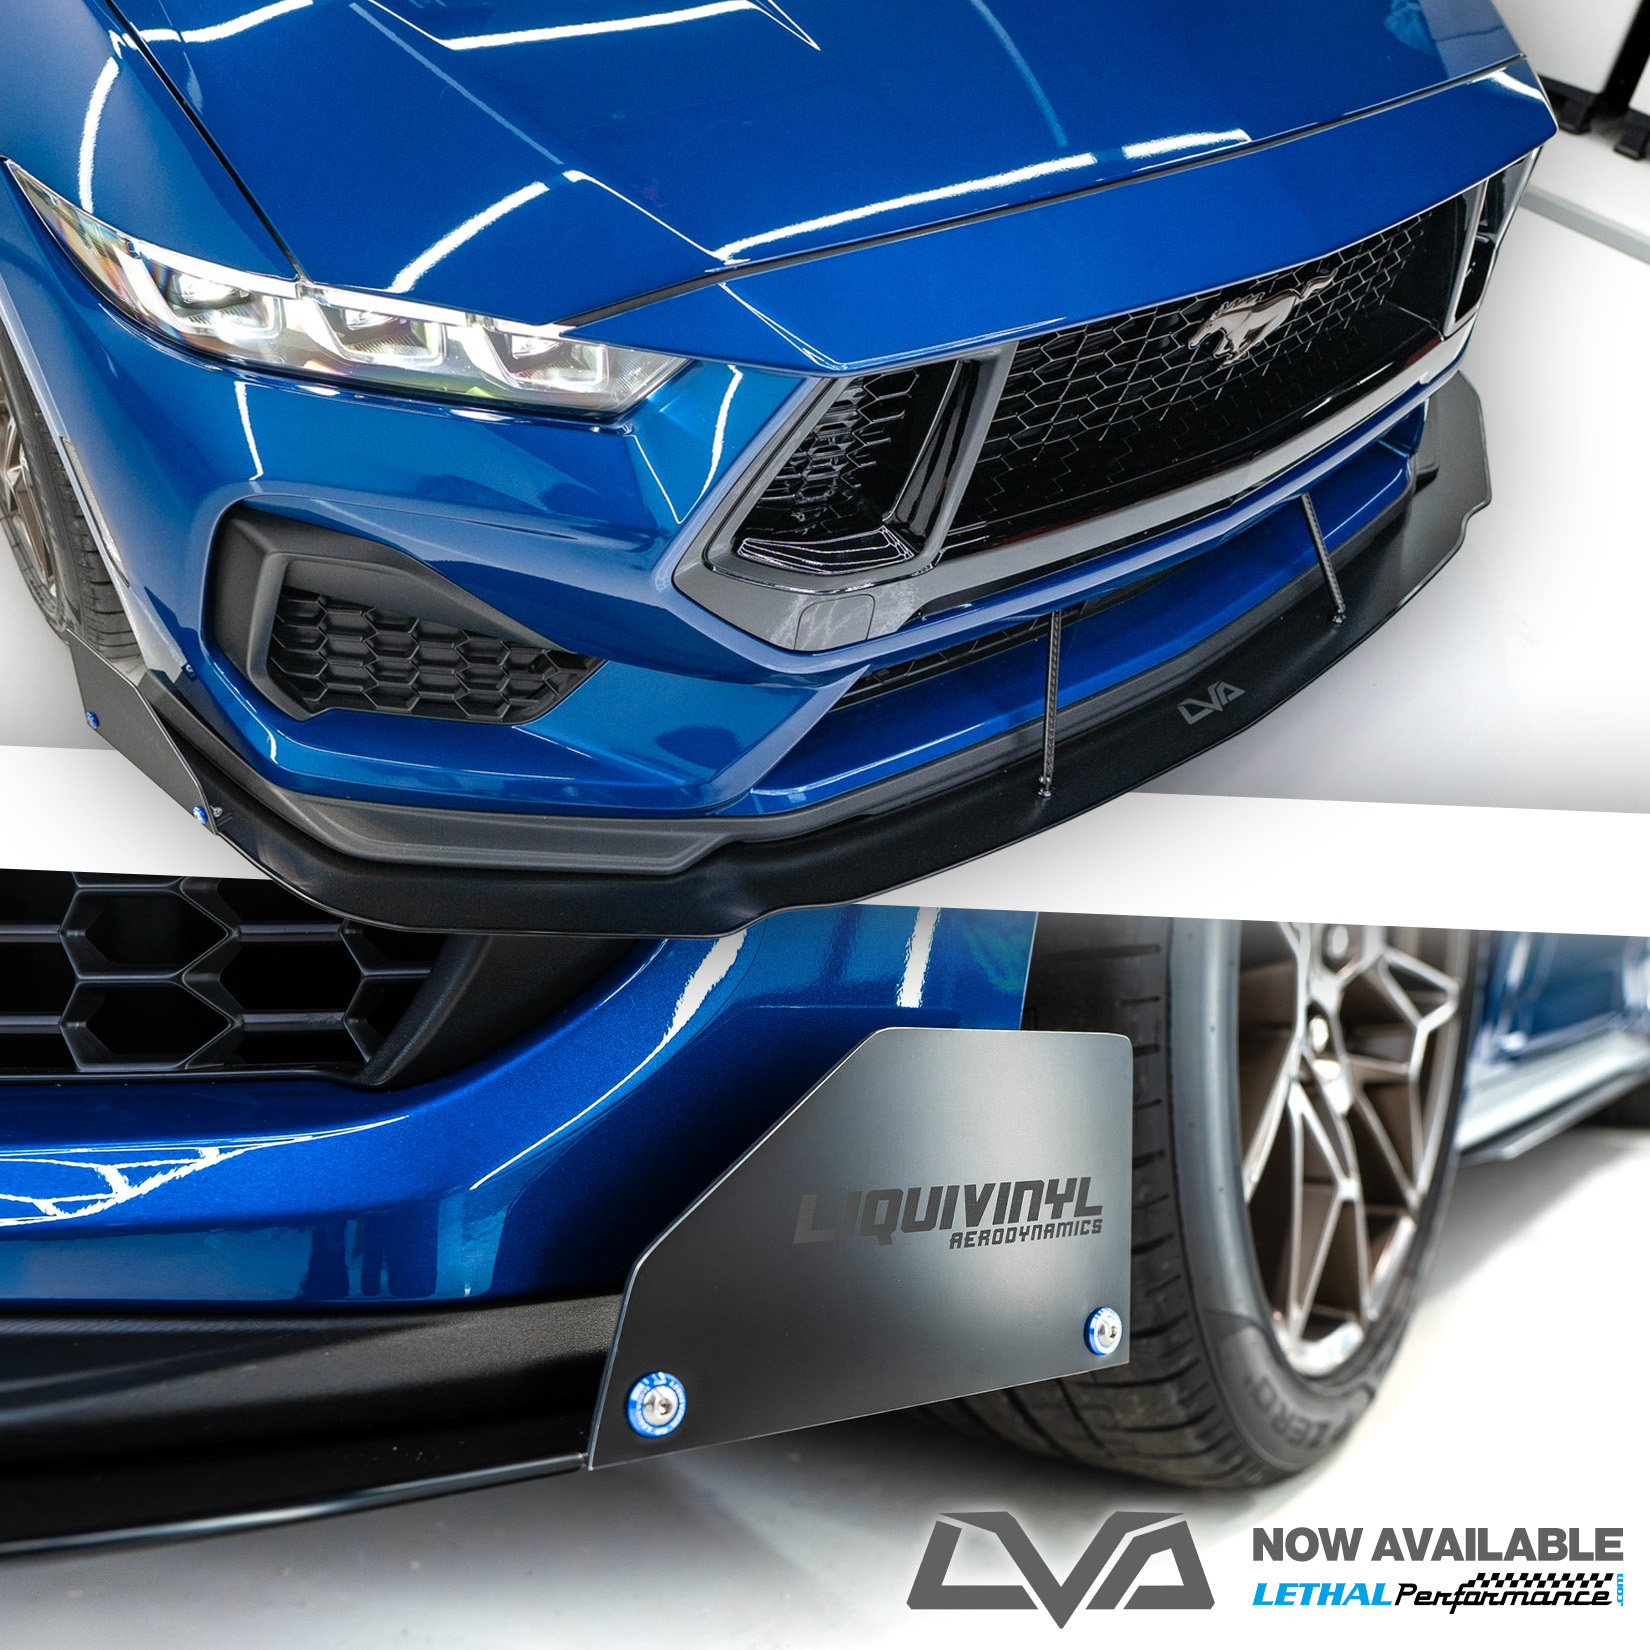 S650 Mustang LiquiVinyl Splitters, Side Skirts, and MORE! - Now Available lva now avail sq